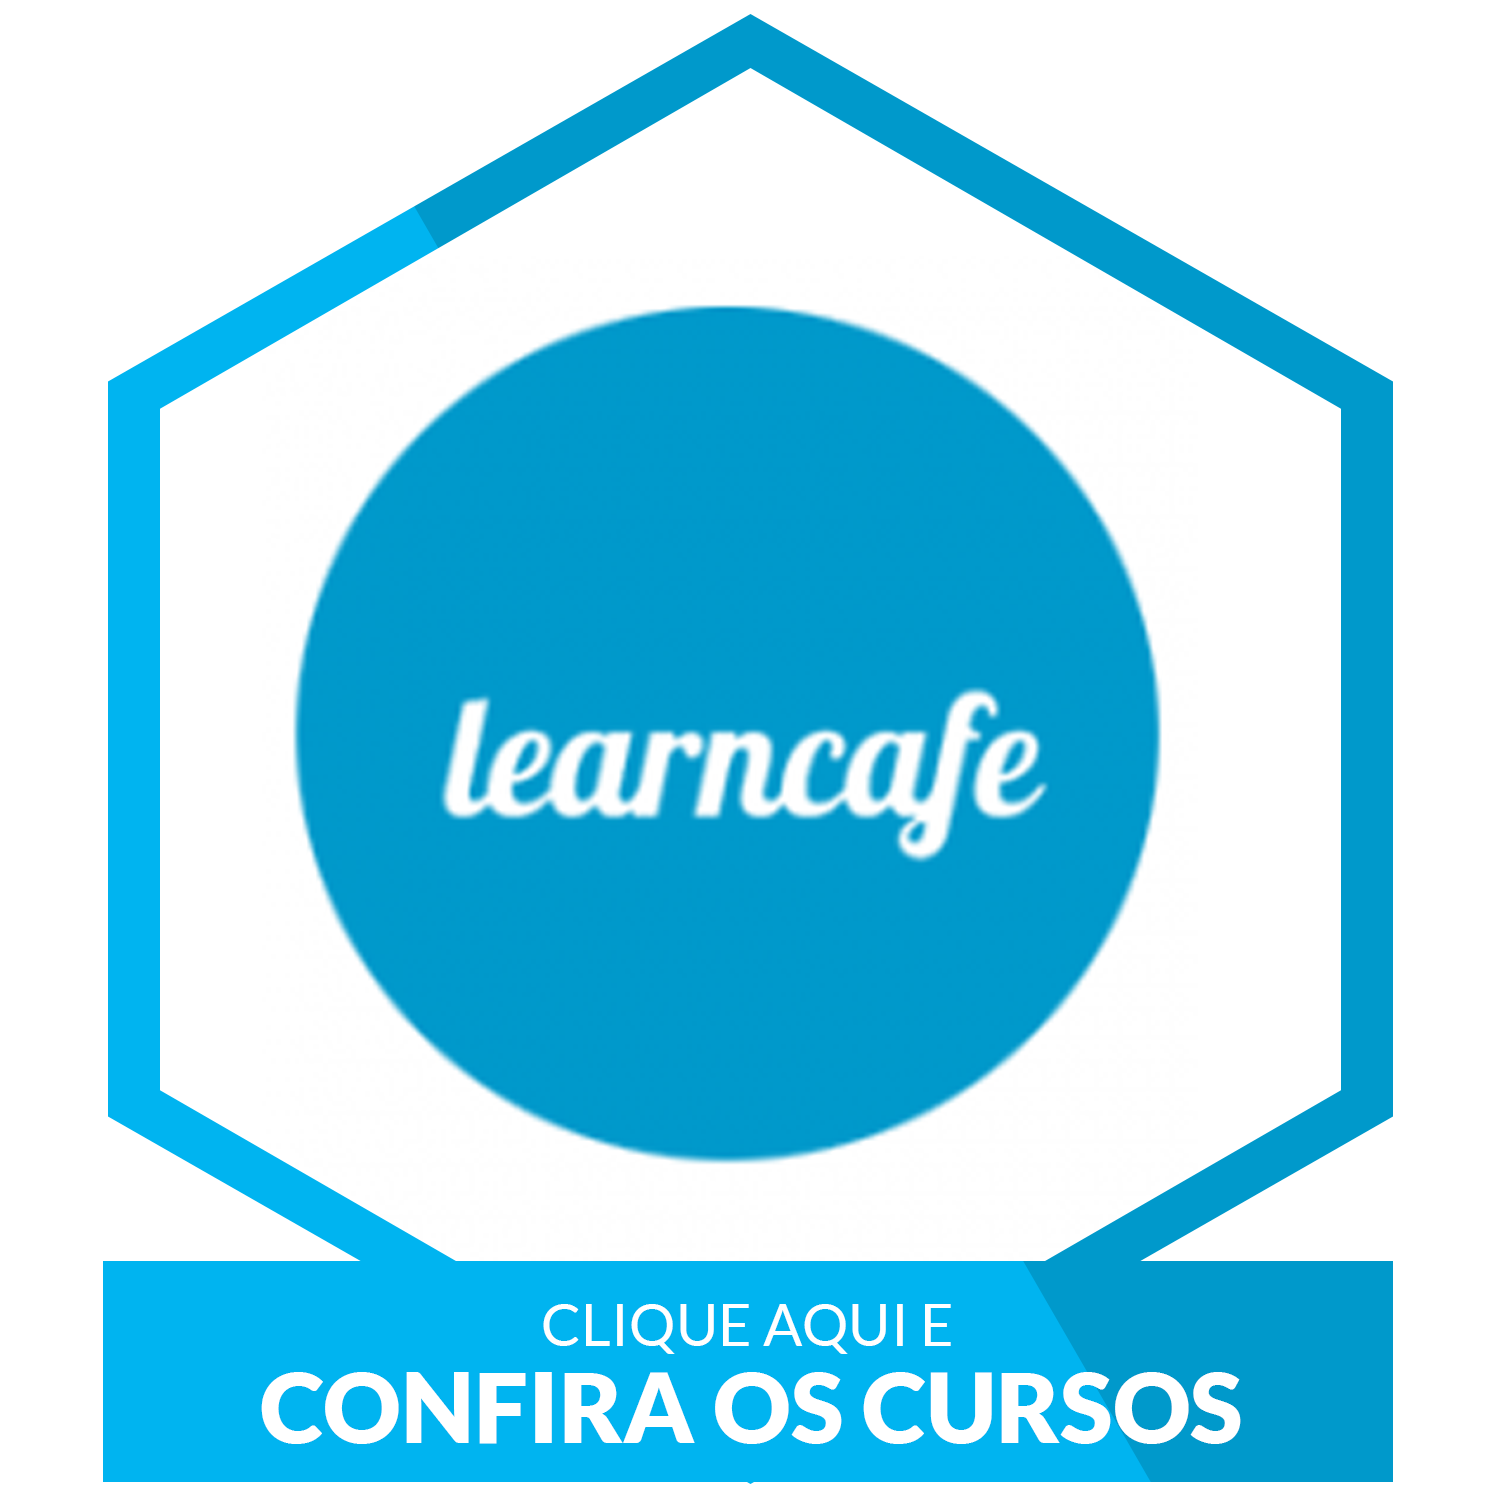 logo-learncafe.png